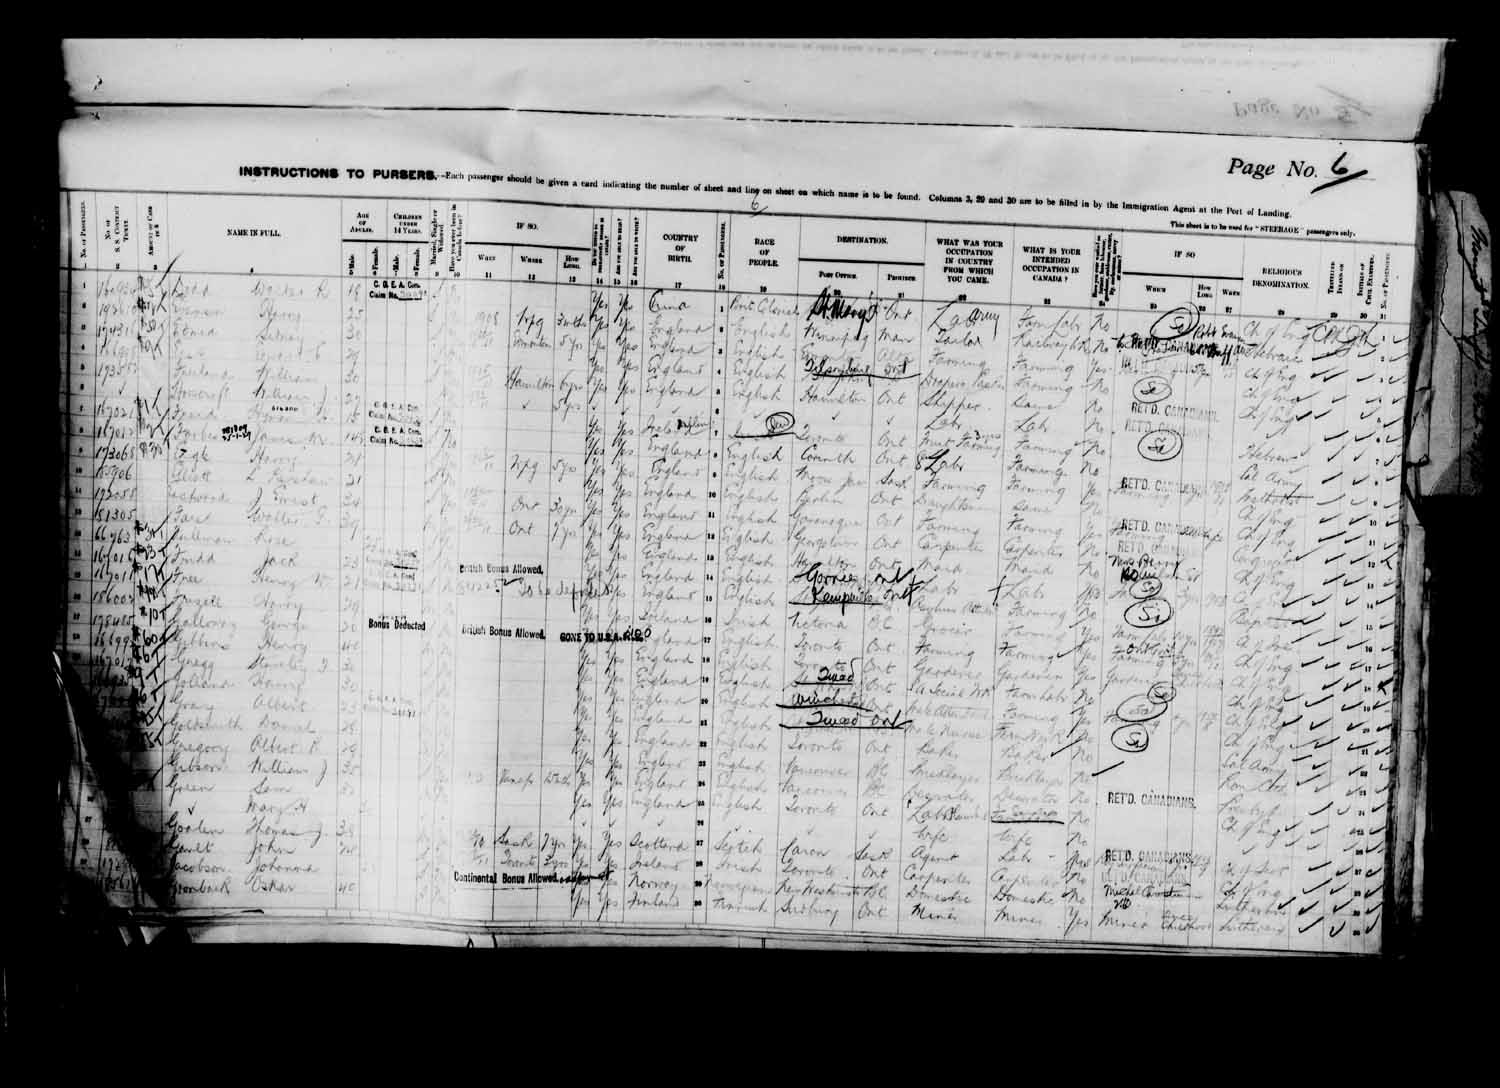 Digitized page of Passenger Lists for Image No.: e003627194